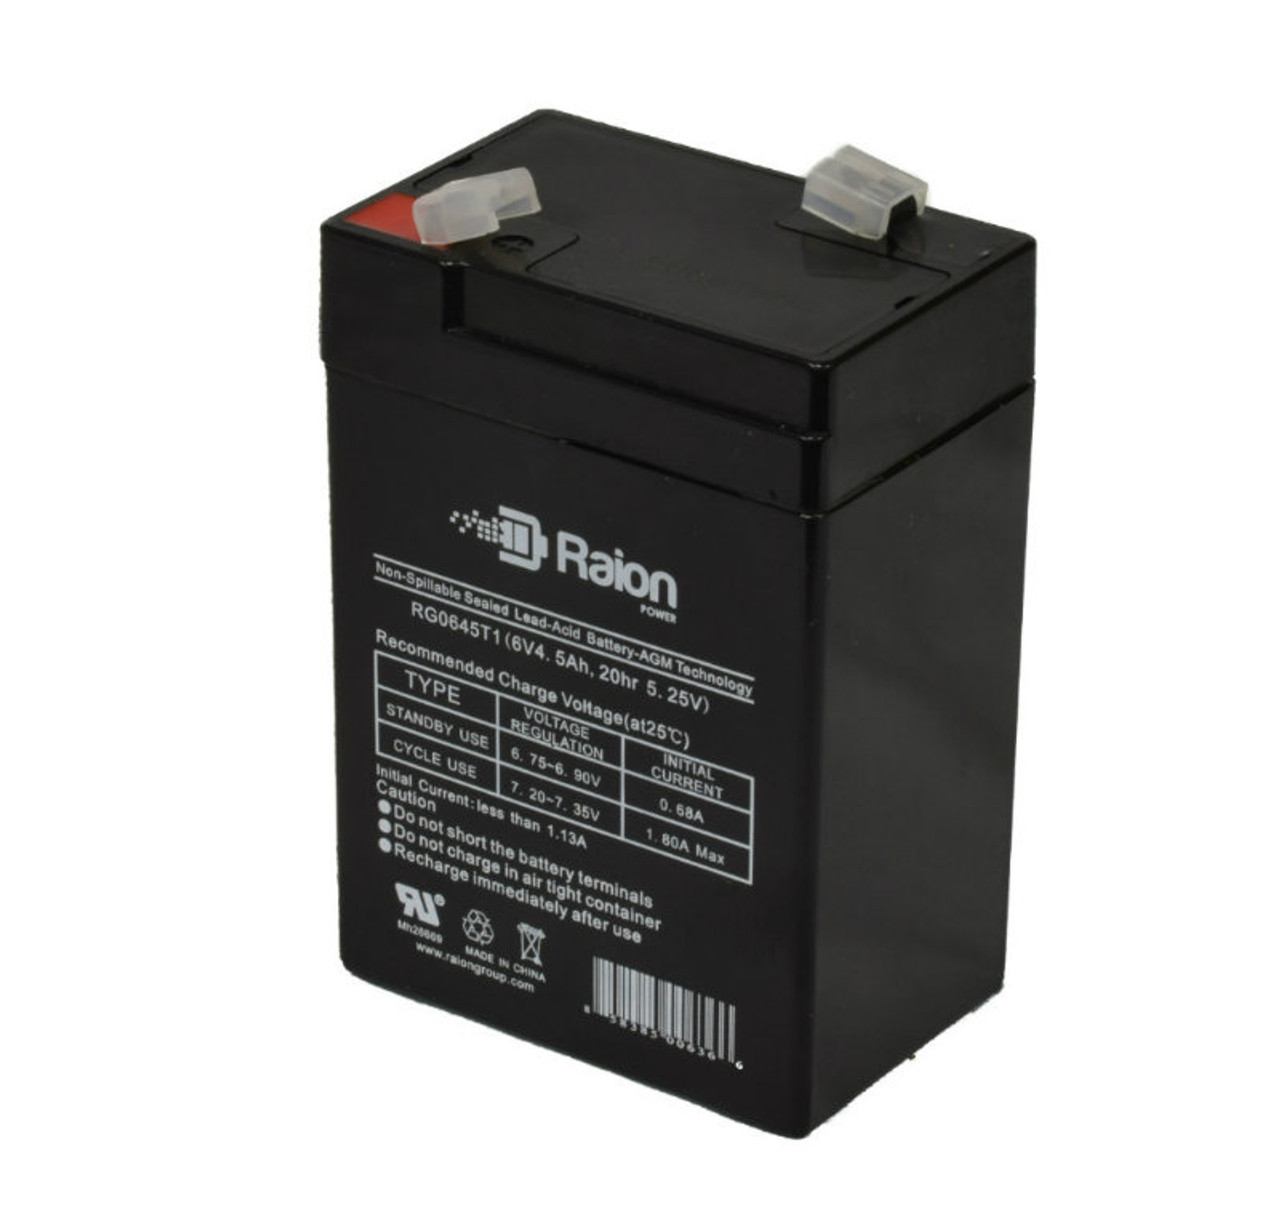 Raion Power RG0645T1 6V 4.5Ah Replacement Battery Cartridge for Edwards 1799112WL